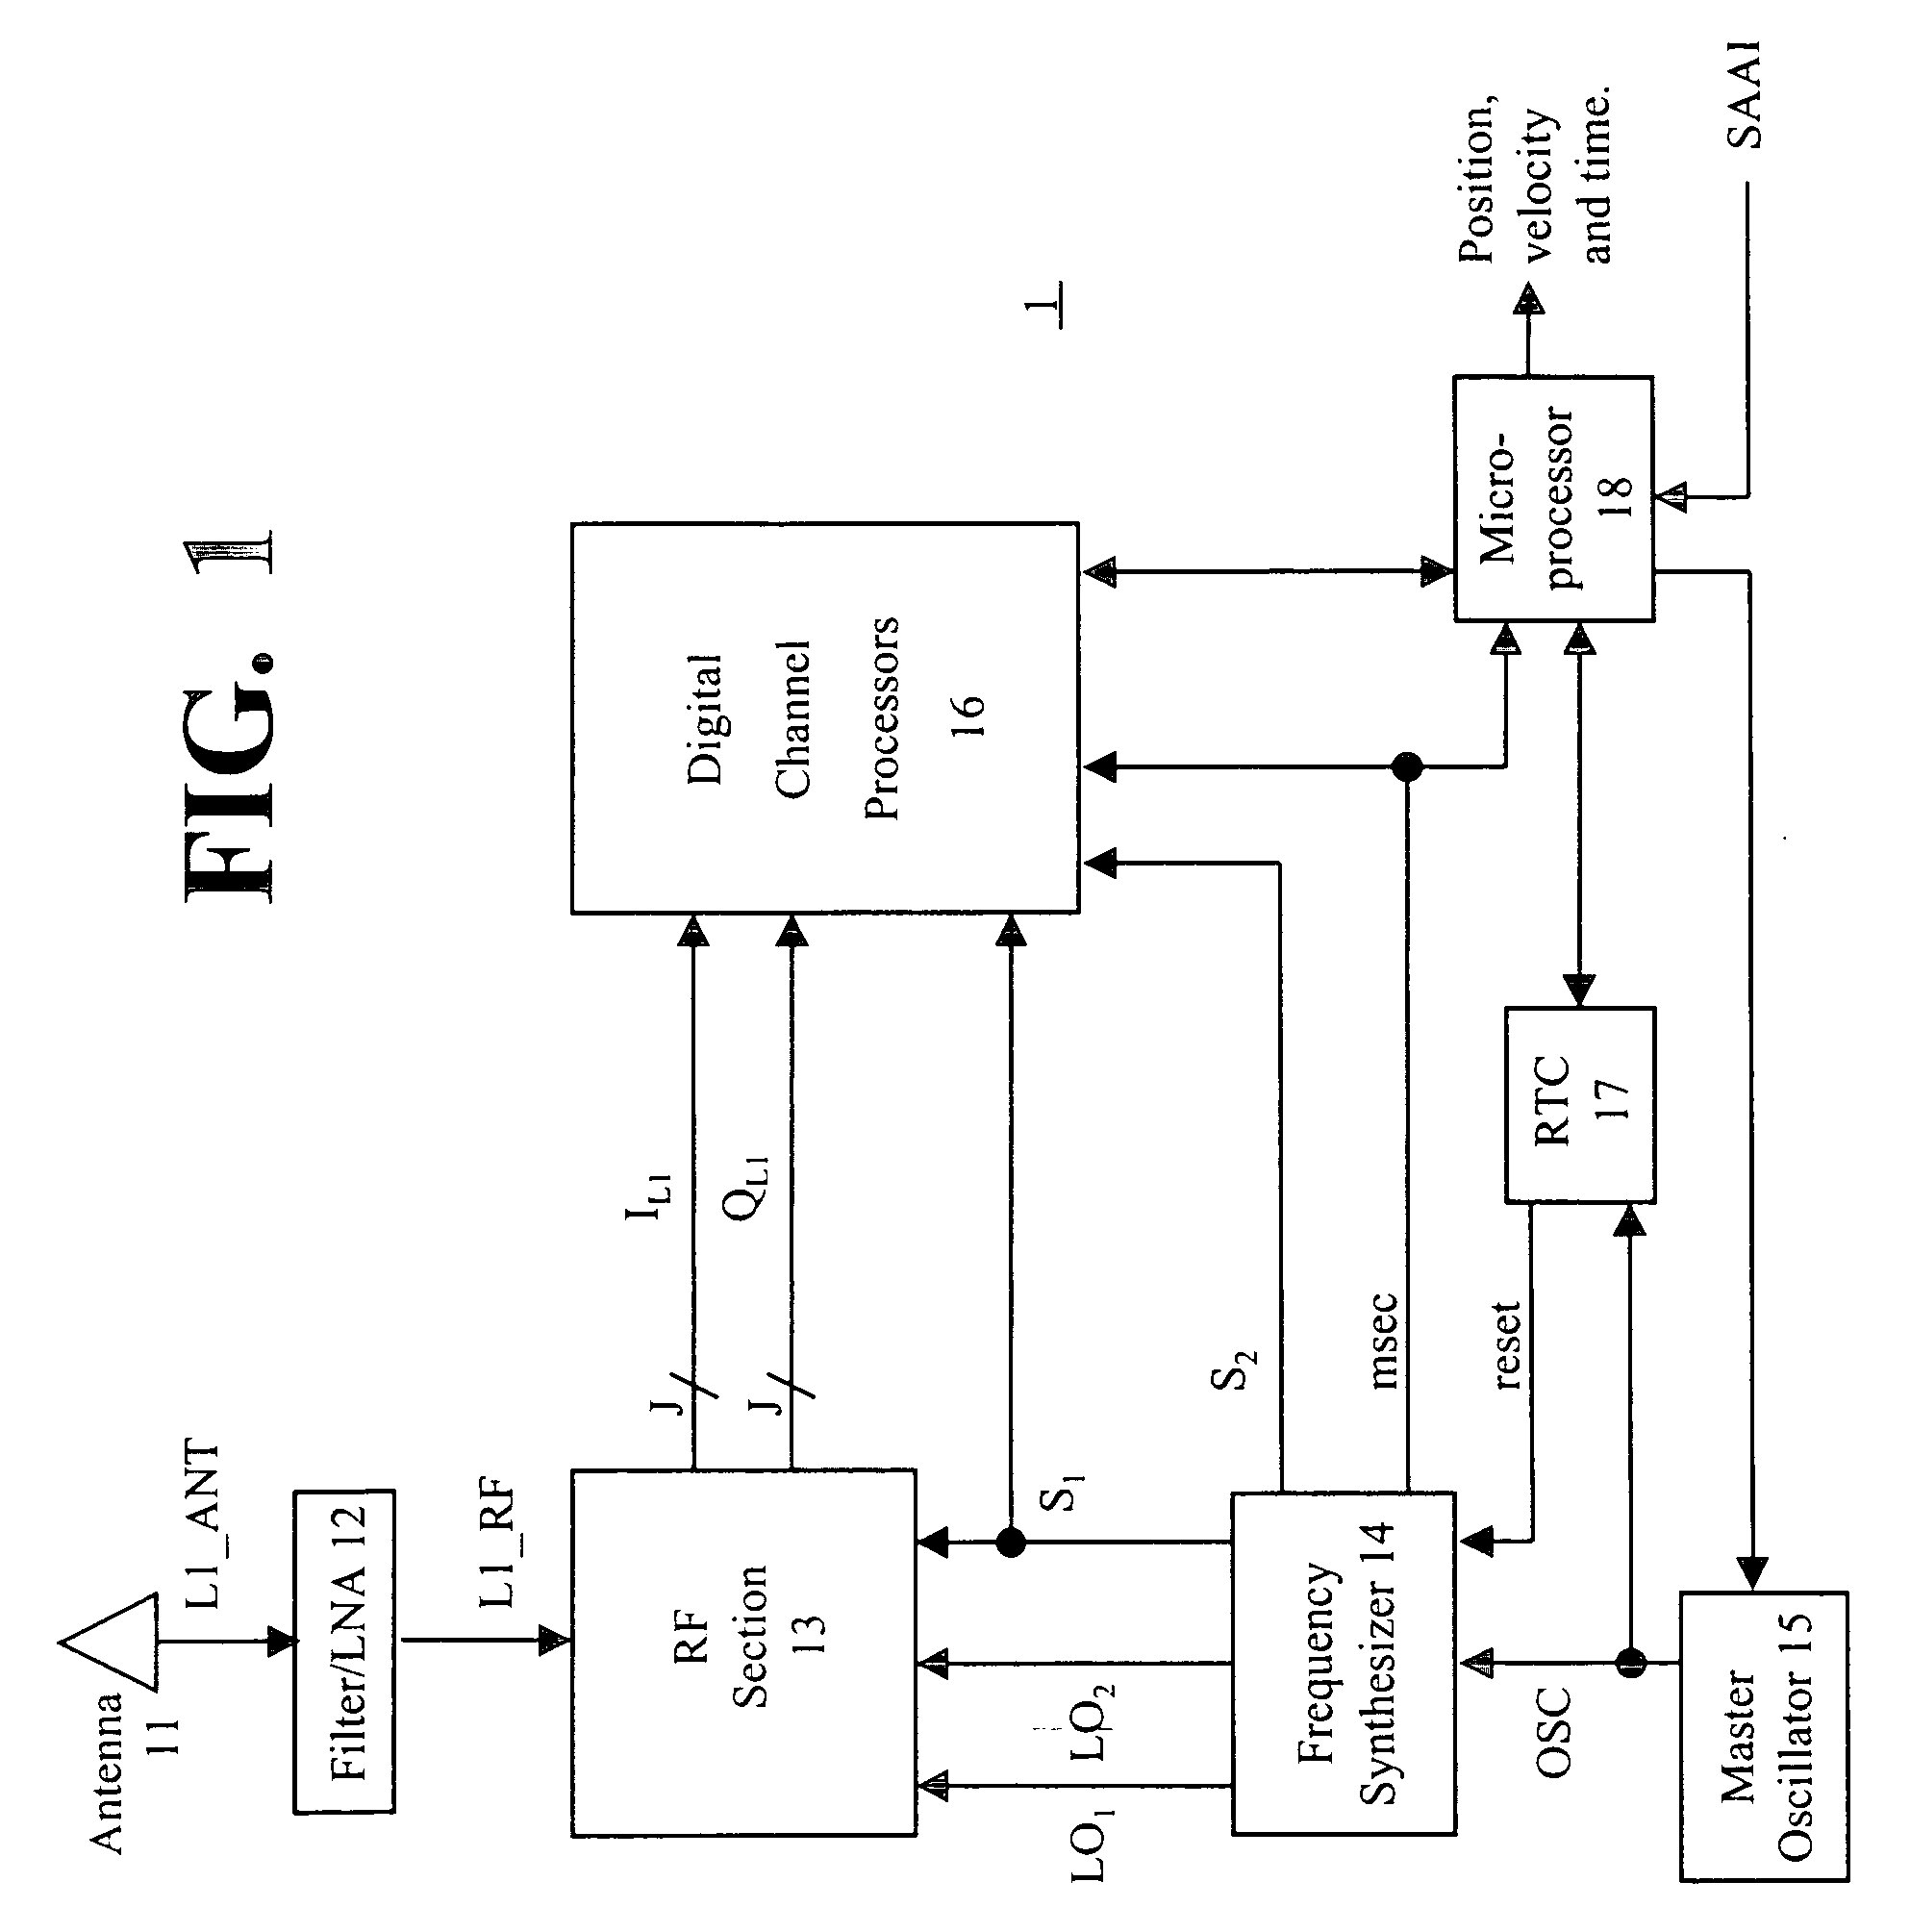 Method and apparatus for fast acquisition and low SNR tracking in satellite positioning system receivers